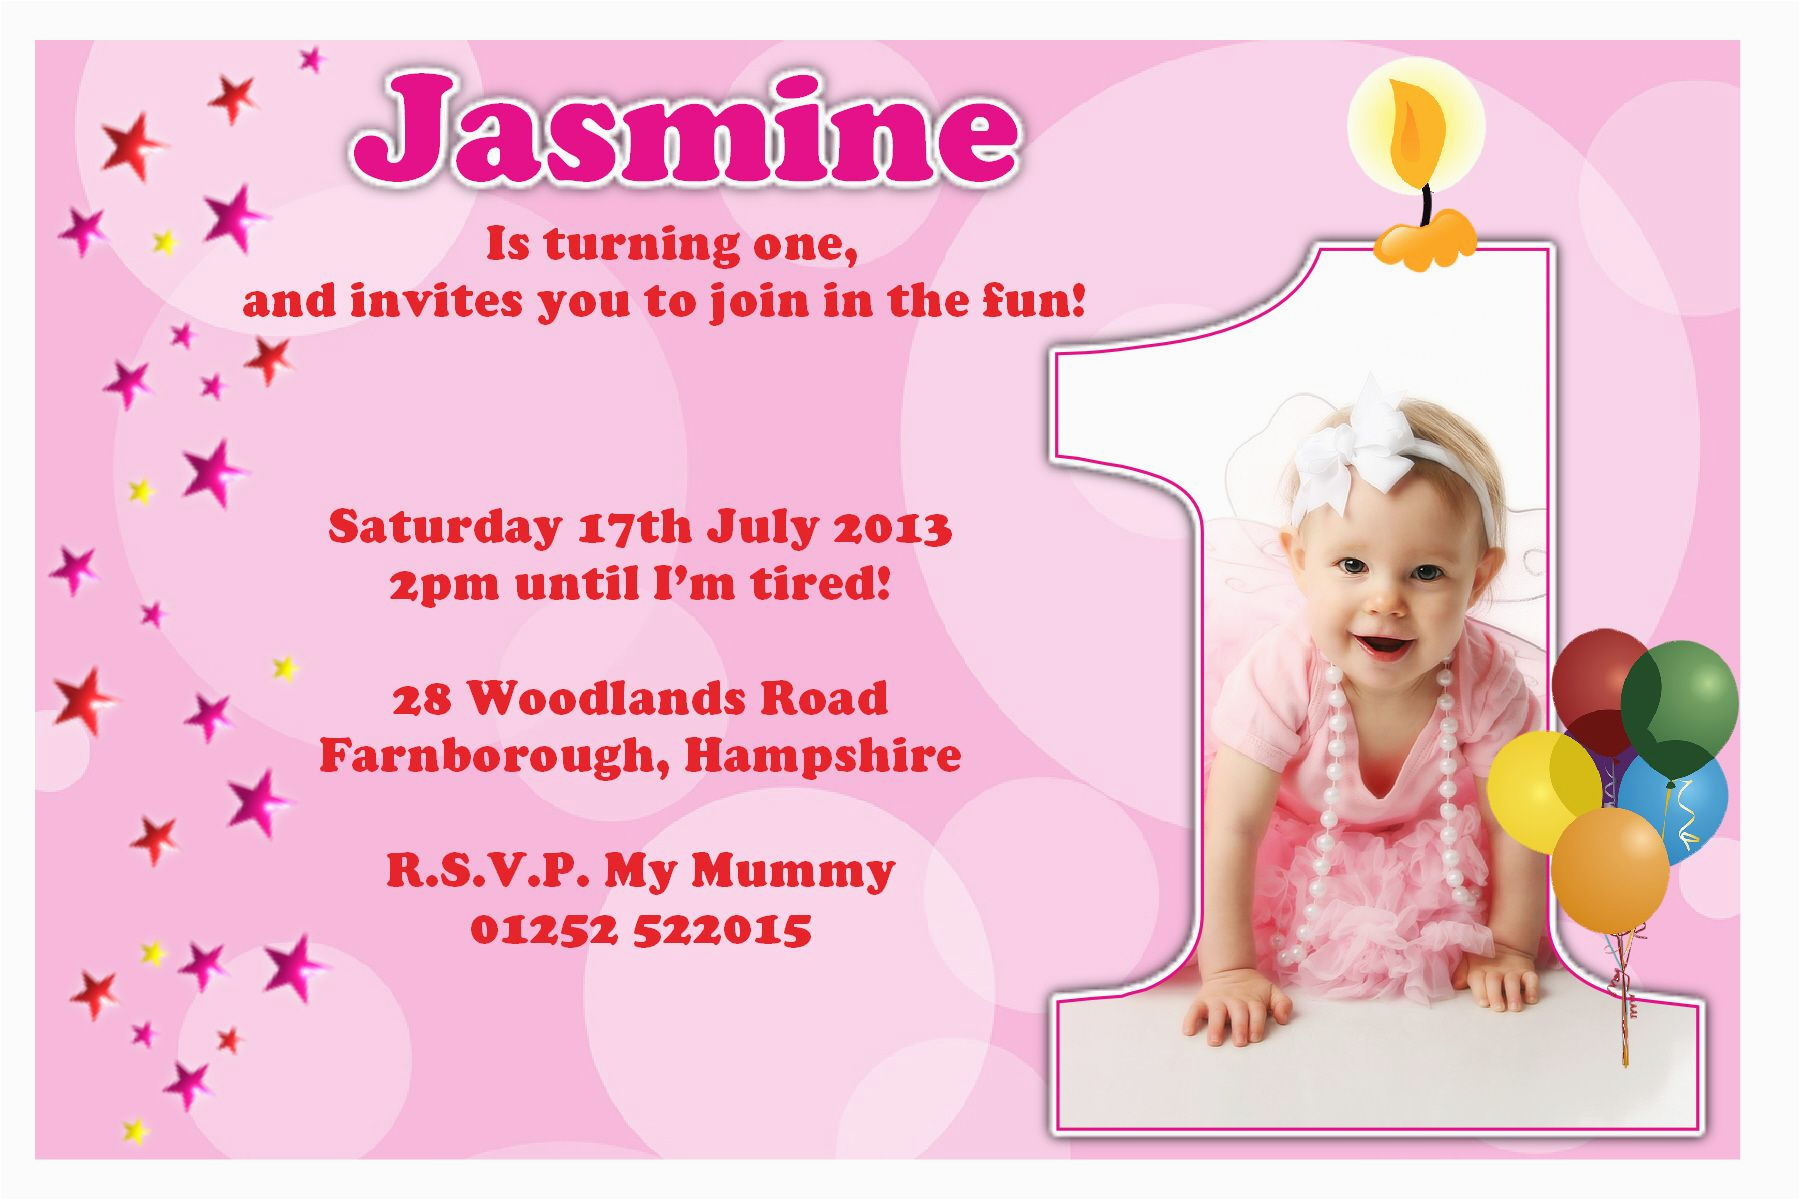 Online First Birthday Invitation Cards 1st Birthday Invitations Girl Free Template Baby Girl 39 S